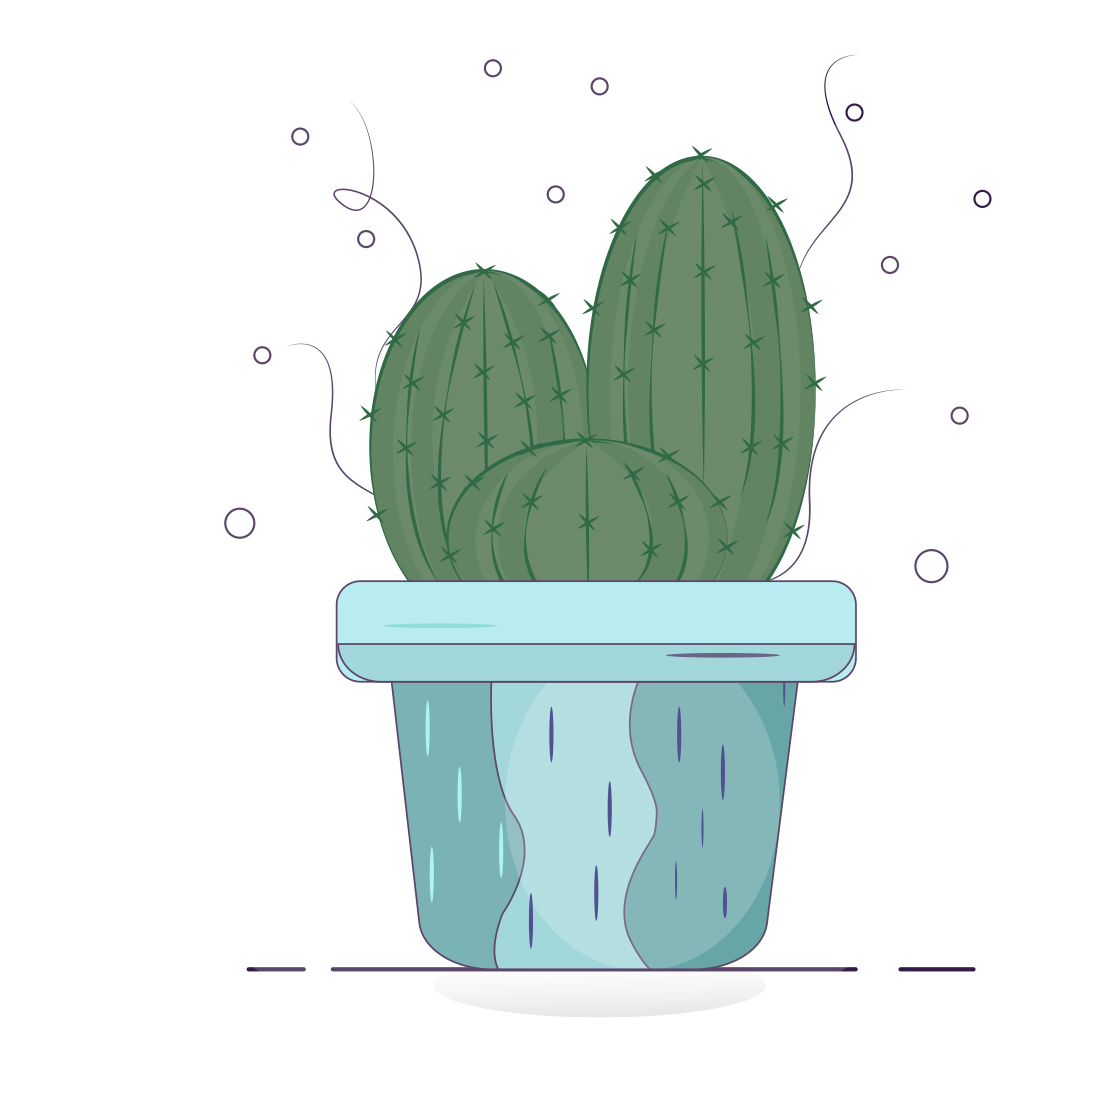 Wonderful image of a cactus in a pot